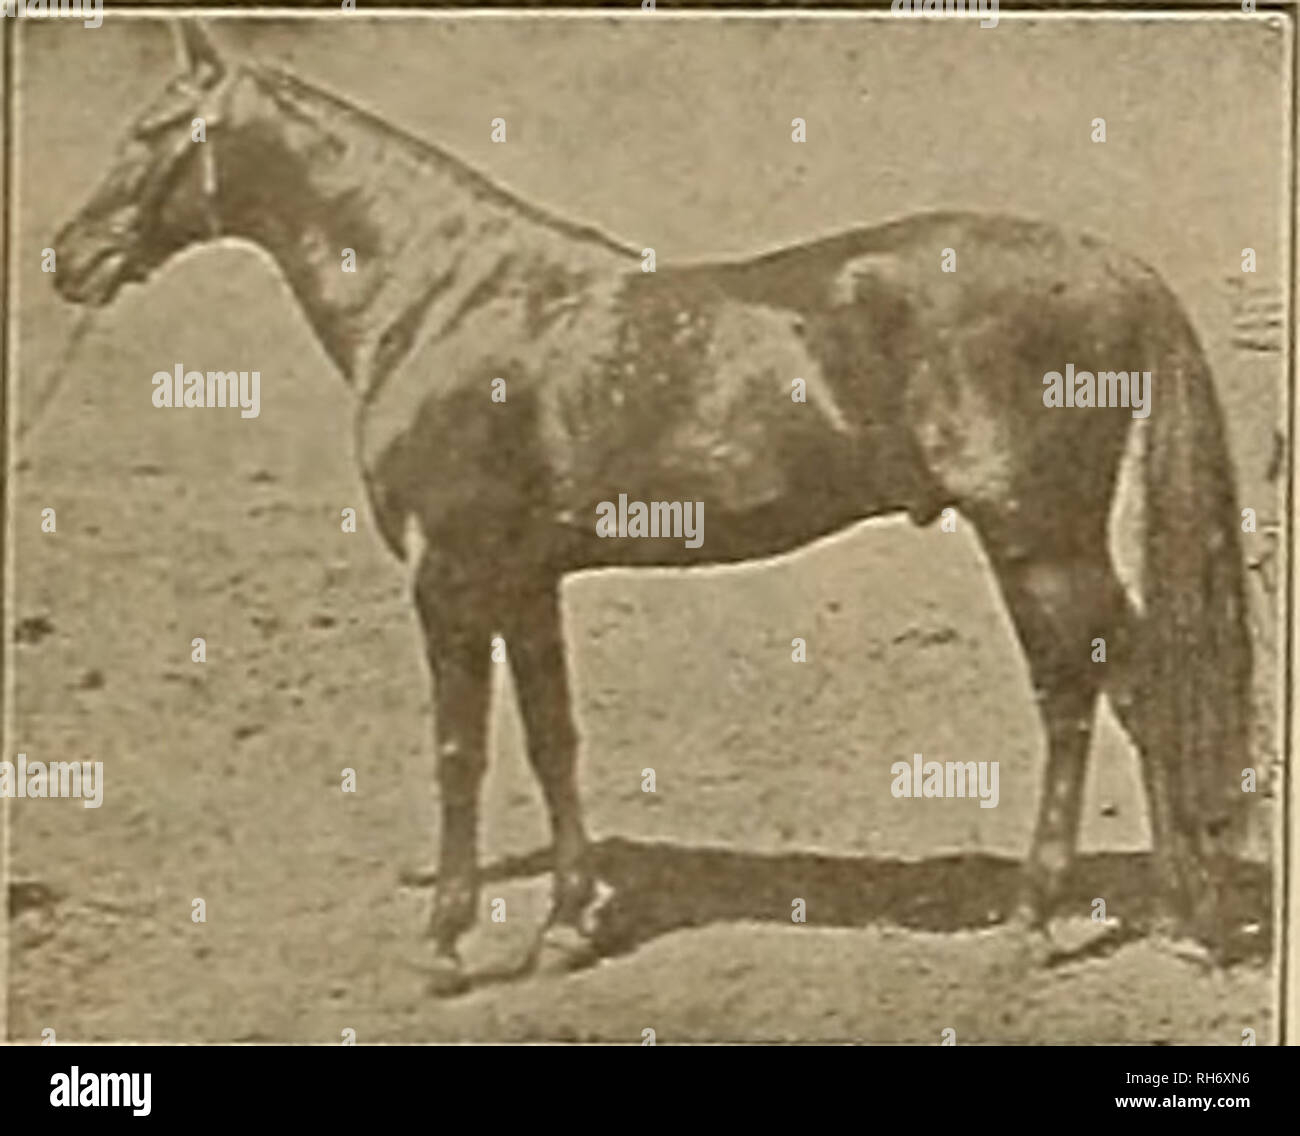 . Breeder and sportsman. Horses. 18 ©Jte gveebev anii g^rartsmcm [May 20, 1905 MENDOCINO 22607 RECORD (THREE-YEAR-OLD) 2:19# Sire or Monte Carlo 2:07* (to wagon 3:0SW&gt;; Holito (8y.o.) SAI* (3y.o )S:IS, (a)L^&amp;Sfc Bay Stallion. t5 34 hands; weight 1190 pounds; hind feet and ankles white; loaled April 24,1889. Bred at Palo Alto S ock Farm. Hire ELECTIONEER 125, son of Hambletonian 10. First dam, MANO (dam of MeDdocino (3) Vl9H Electant2:10s, Morocco (3 y o trial) 2:22) by Piedmont 904. 2-.17H; second dam. Mamie (dam of Mamie W. (3) 2:17*. Hyperion 2:213*. Memento 2:25*. Mithra (p) 2:14*) b Stock Photo